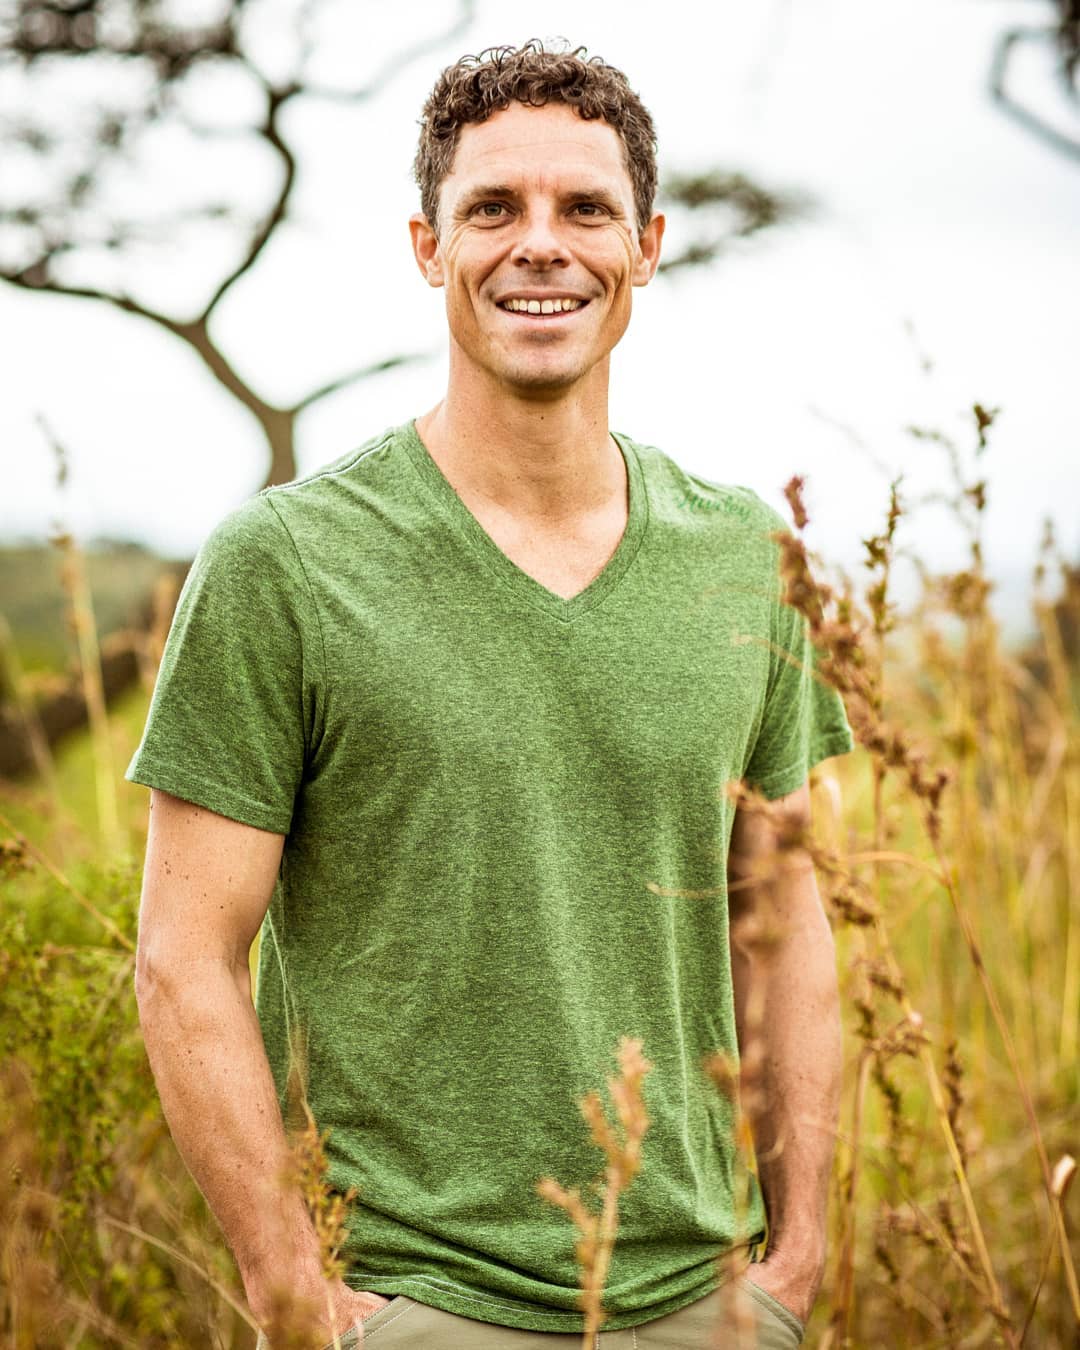 Meet Trevor Steyn, the founder of Esse Skincare! He's been formulating Esse's skincare products since 2002.